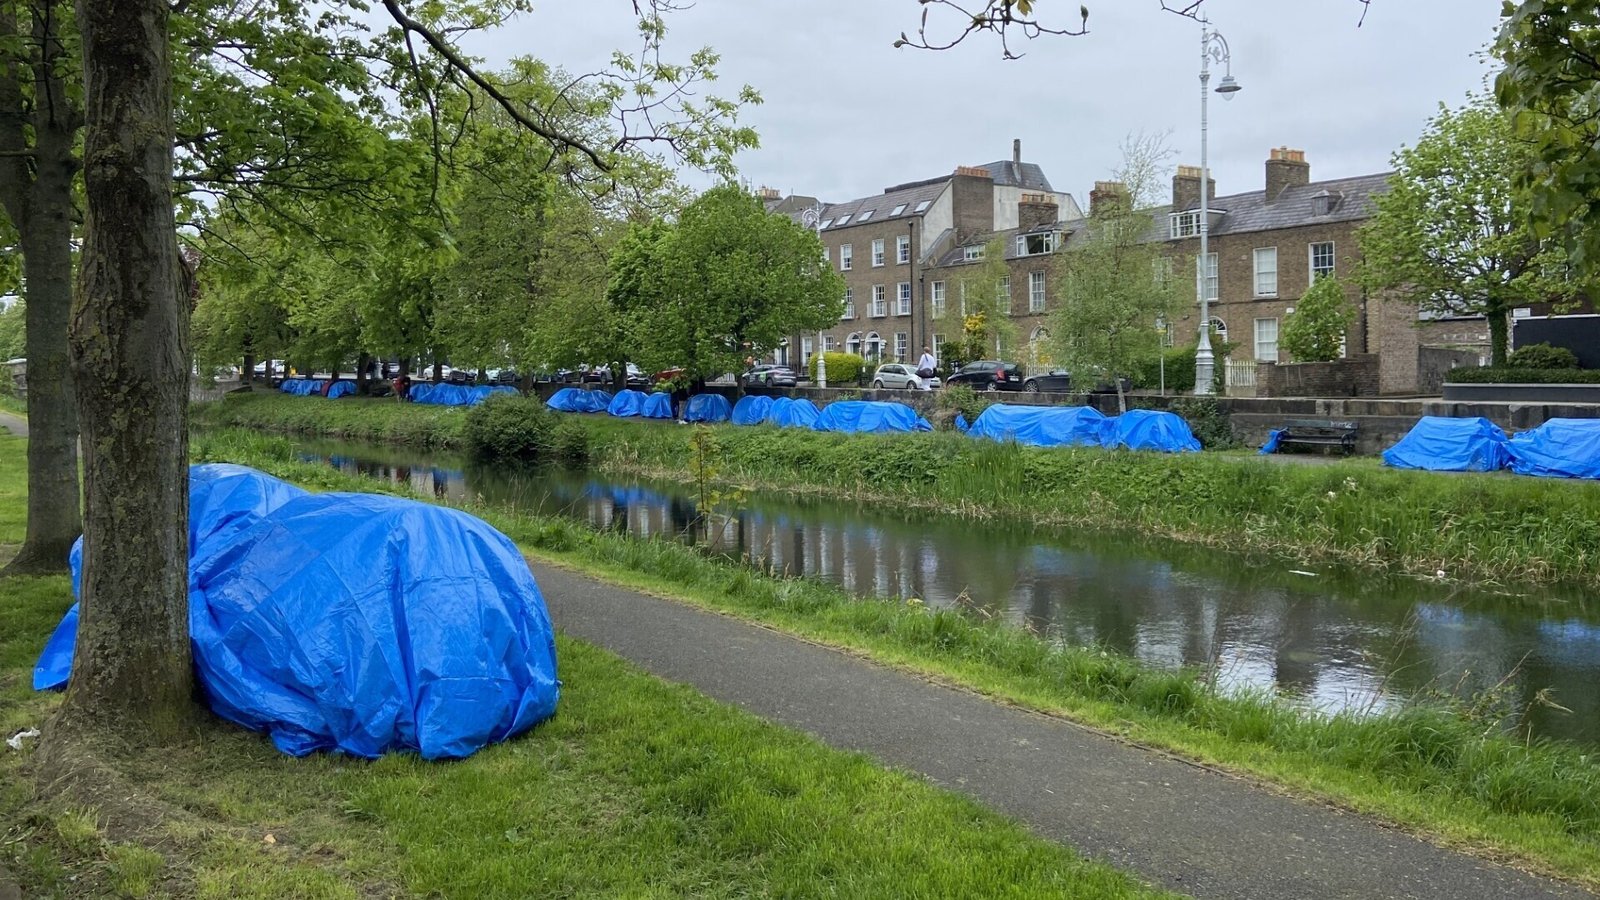 More than 40 tents have been pitched by asylum seekers along the Grand Canal in Dublin, less than 400 metres from the International Protection Office on Mount Street.